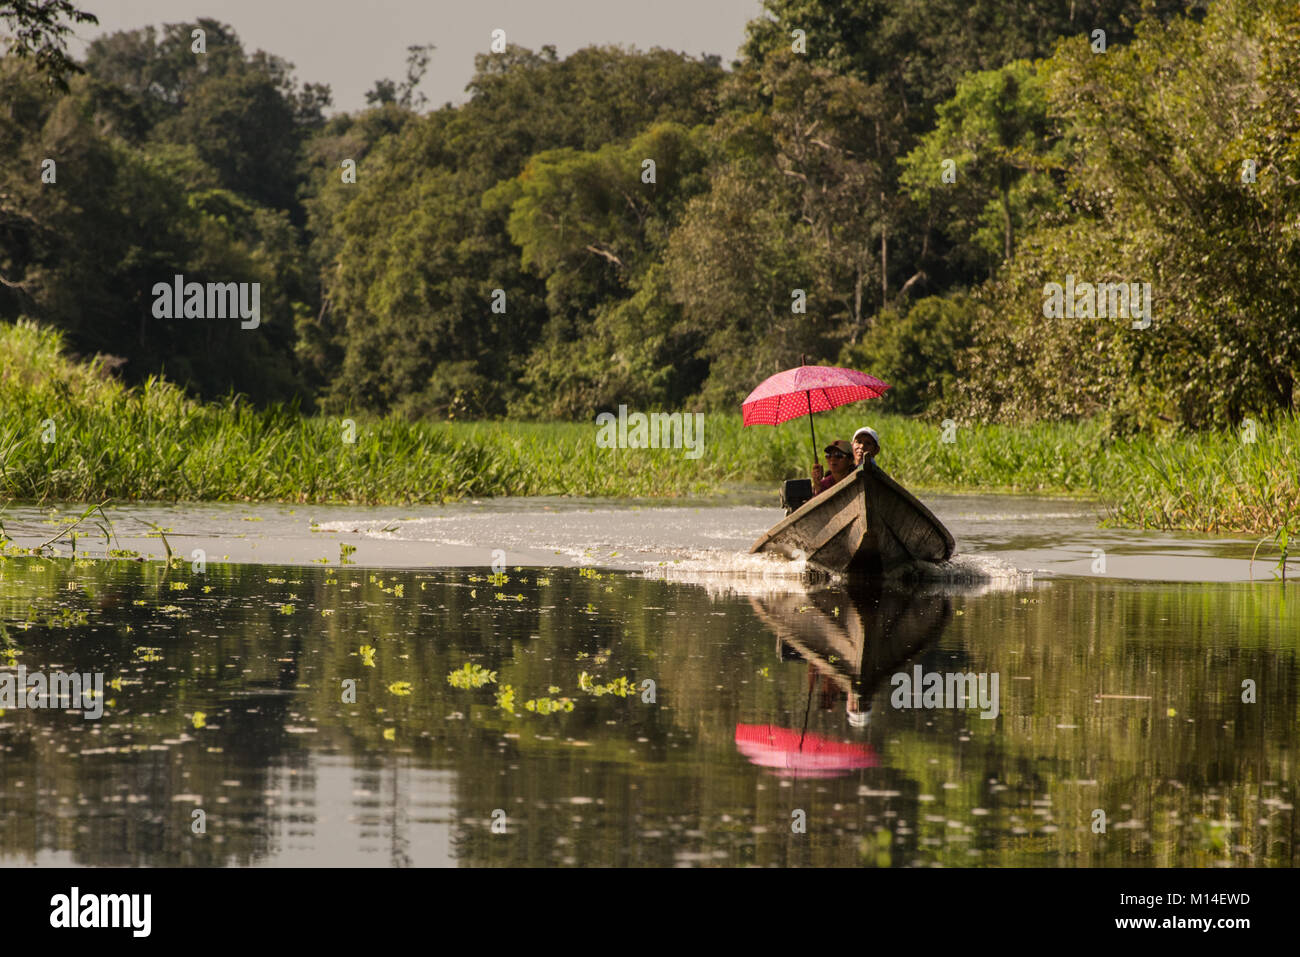 In an area with no roads the rivers are the best mode of transportation.  This family travels along the river with an umbrella to protect from the sun. Stock Photo